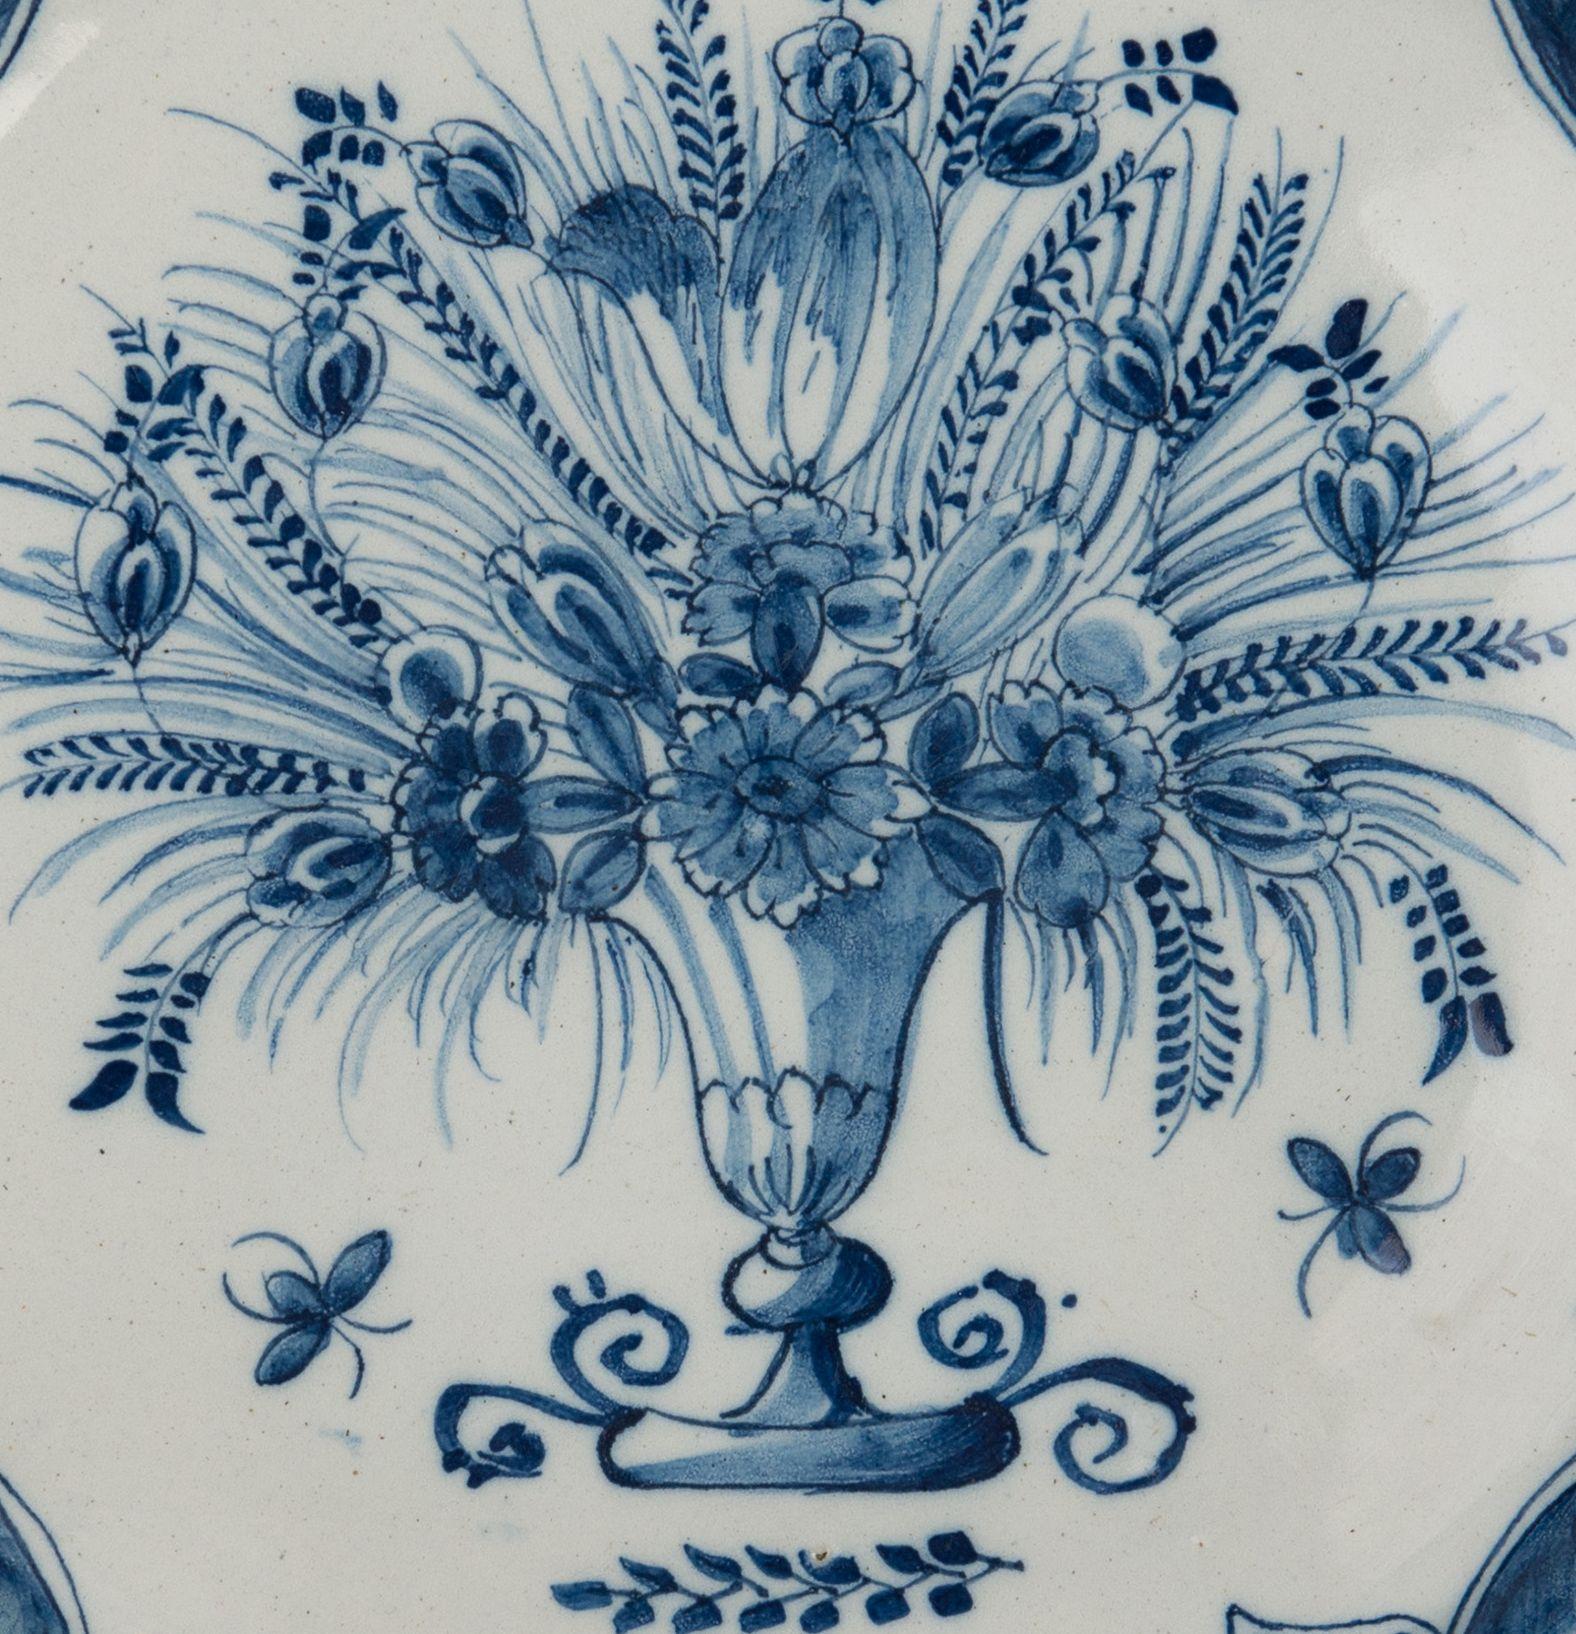 Blue and white dish with flower vase. Delft, 1740-1760
The Three Bells pottery. Mark: three bells

Dish with a scalloped rim painted in blue showing a vase with several flowers and branches. A small branch is depicted under the vase. The rim is